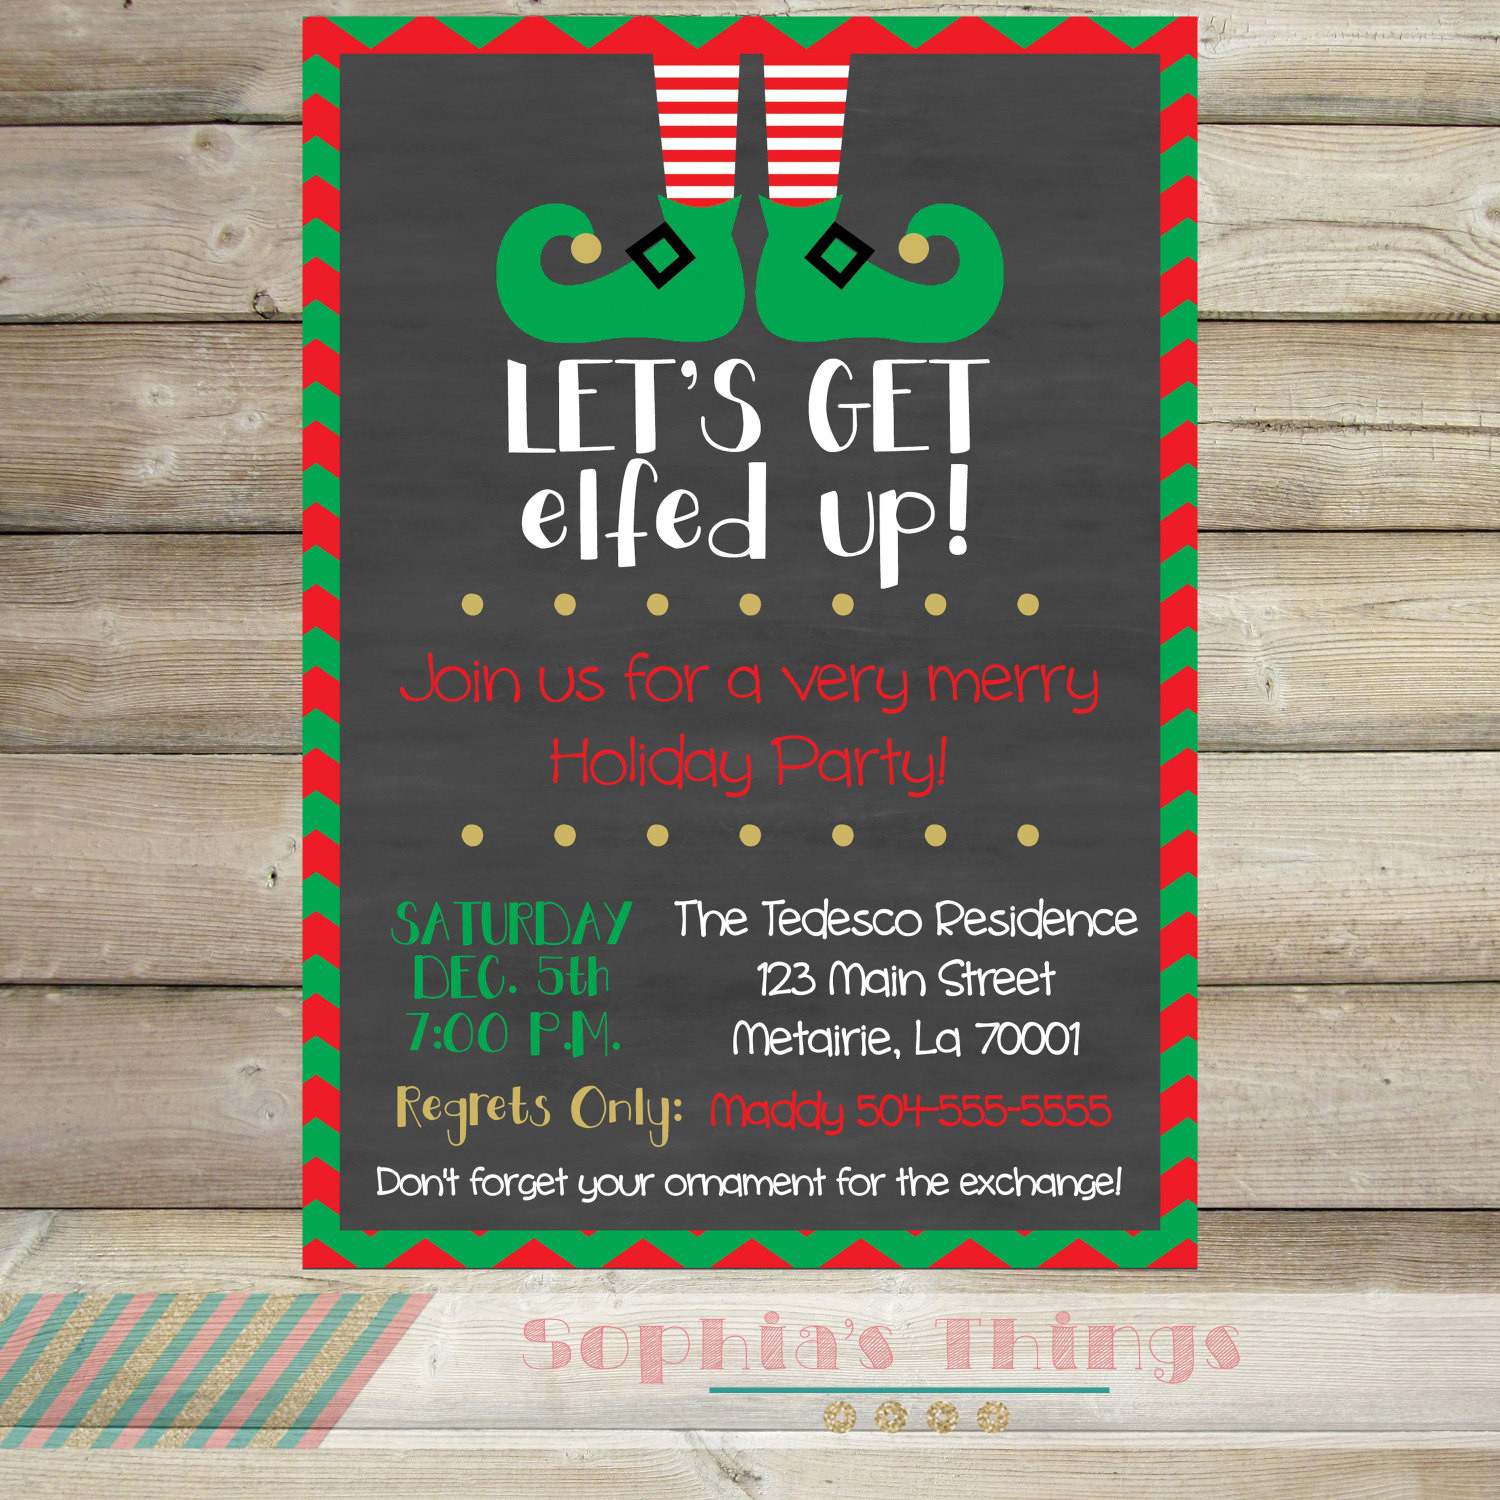 Holiday Party Invitation Ideas
 Let s Get Elfed Up Christmas Party Invitation Holiday